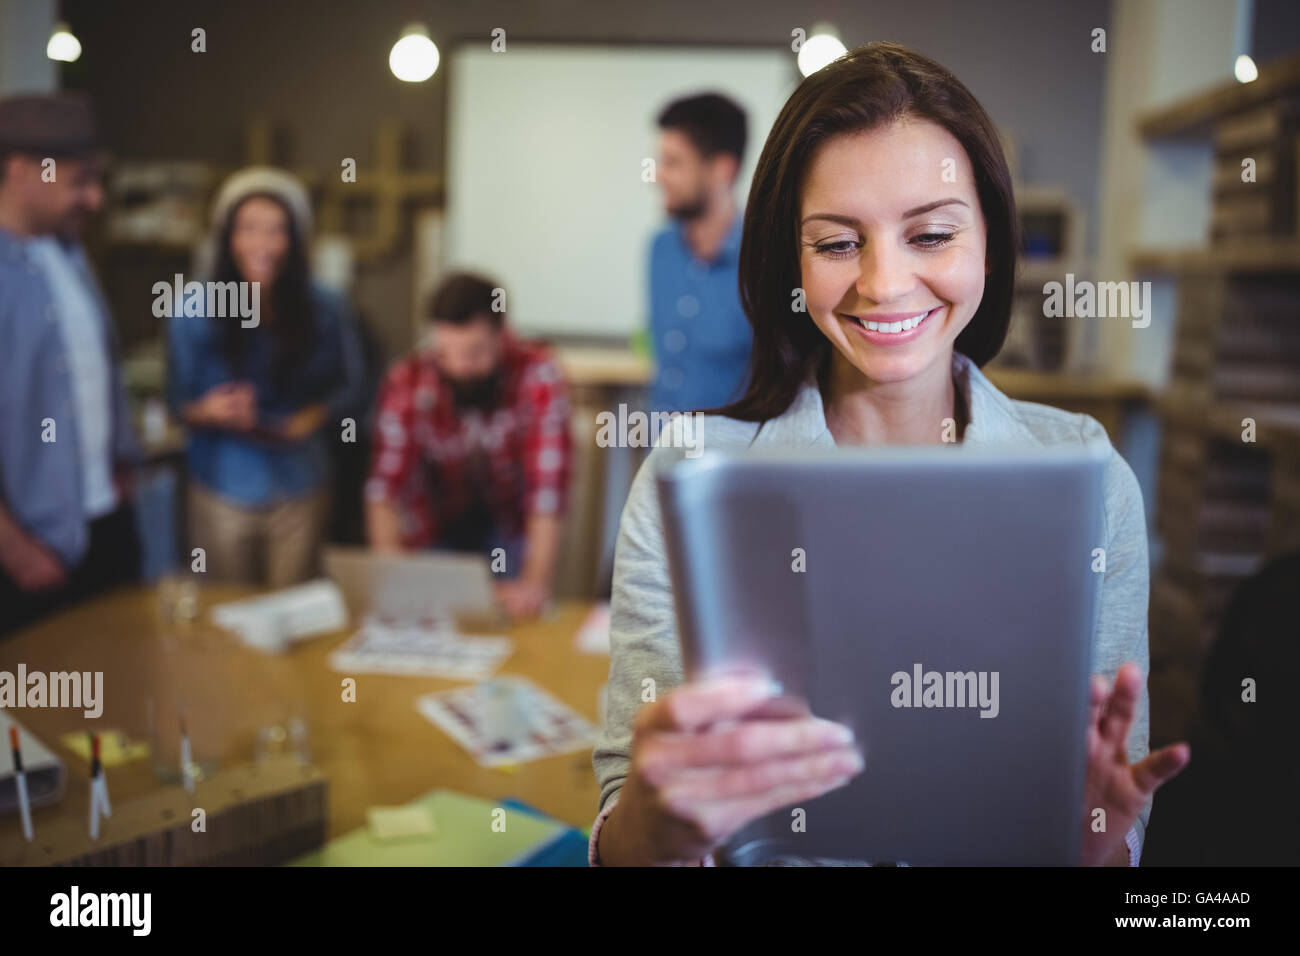 Businesswoman smiling while using digital tablet Stock Photo